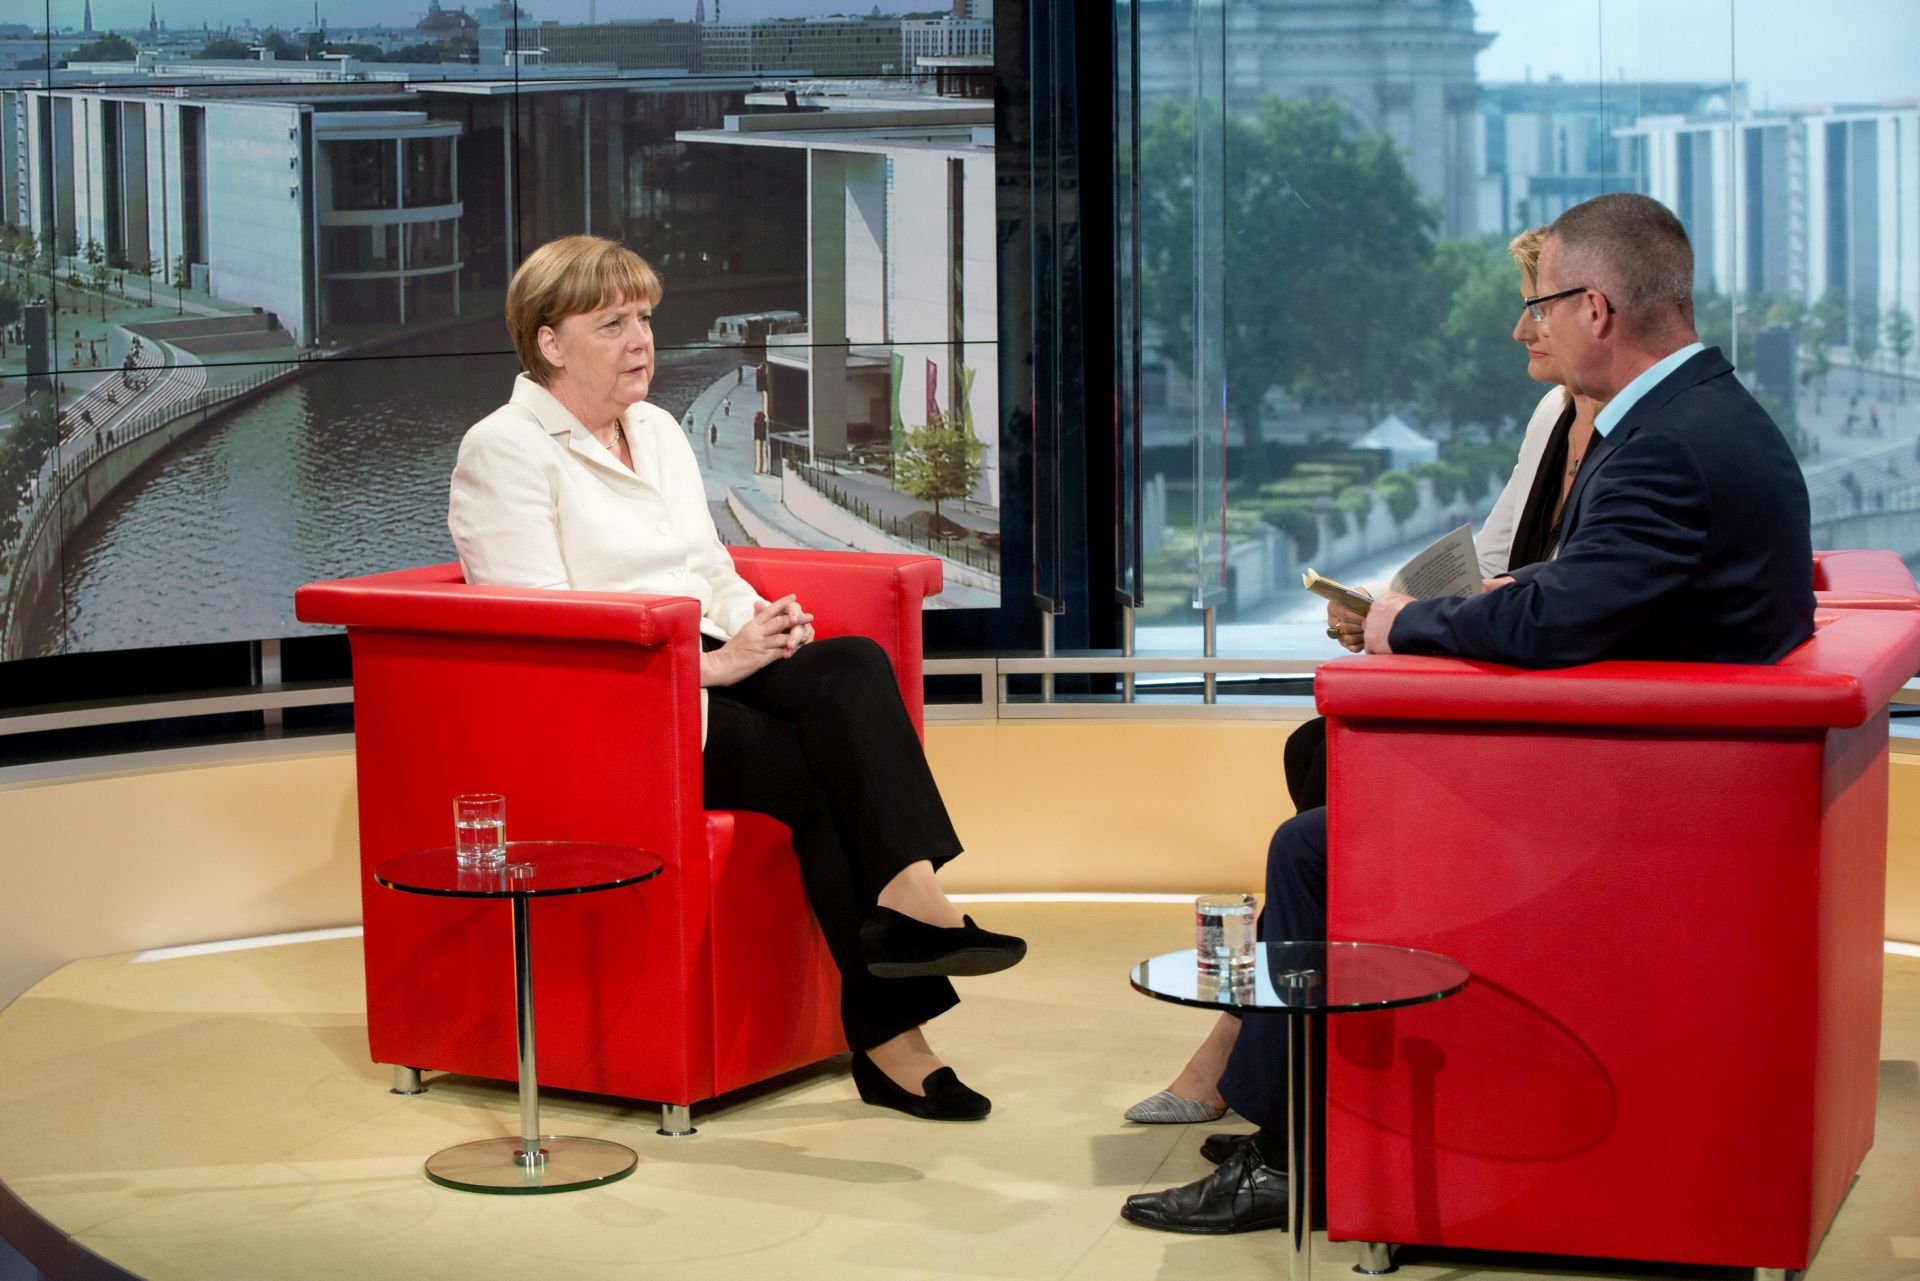 epa04853339 German Chancellor Angela Merkel (L) is interviewed by journalists Tina Hassel (not pictured) and Rainald Becker (R) at the German television channel ARD main studios in Berlin, Germany, 19 July 2015.  EPA/JOERG CARSTENSEN